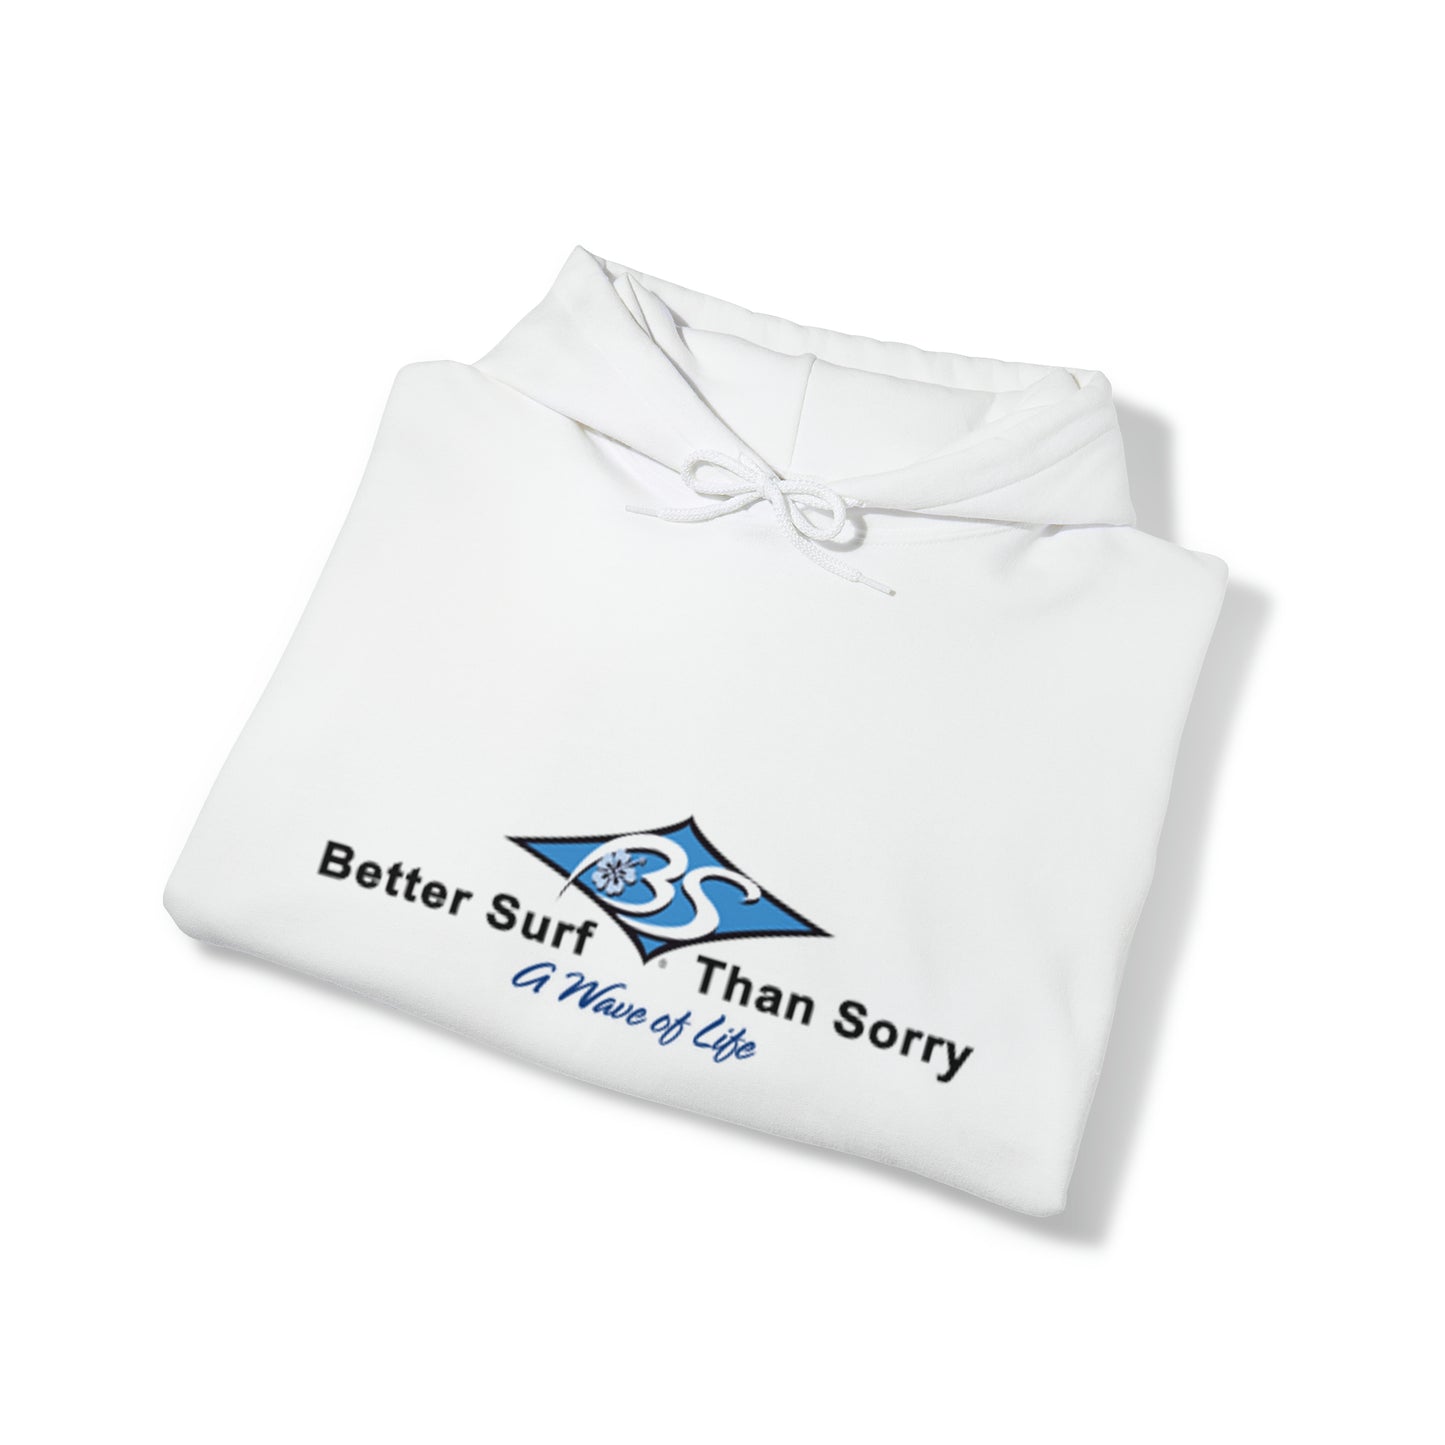 Better Surf Than Sorry Test Printify Product